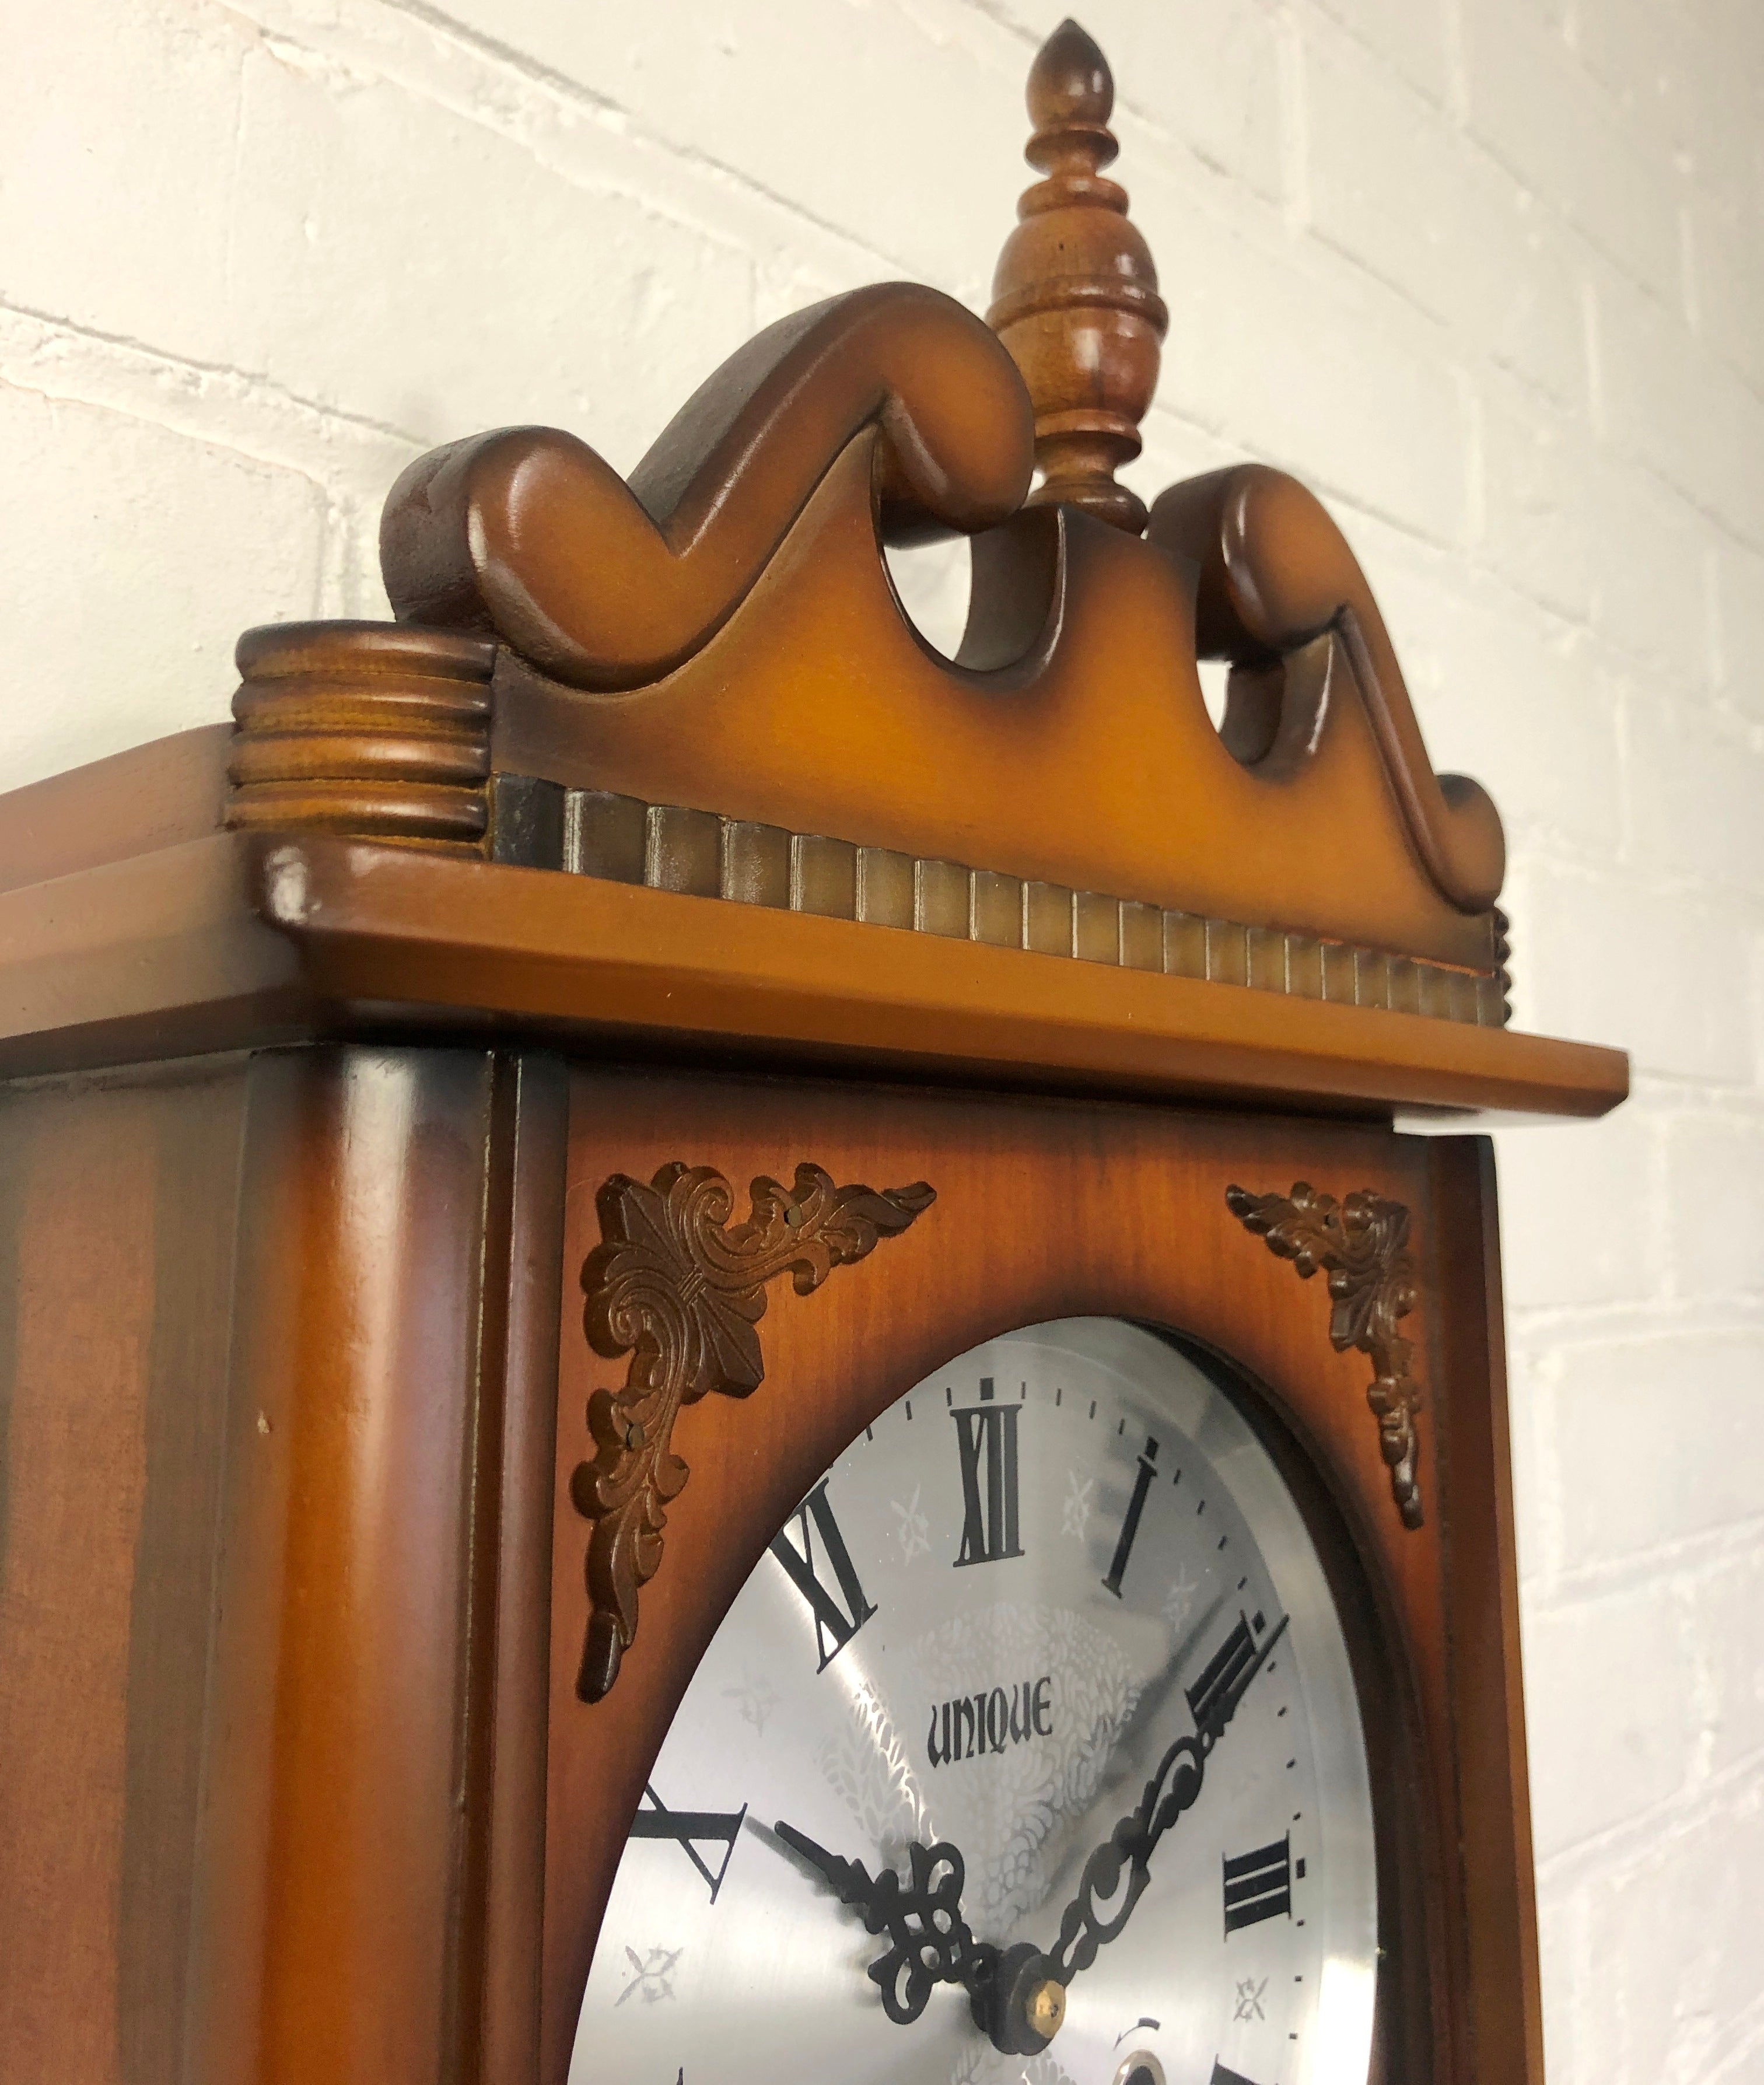 Vintage 31 Day UNIQUE Hammer on Coil Chime Wall Clock | eXibit collection